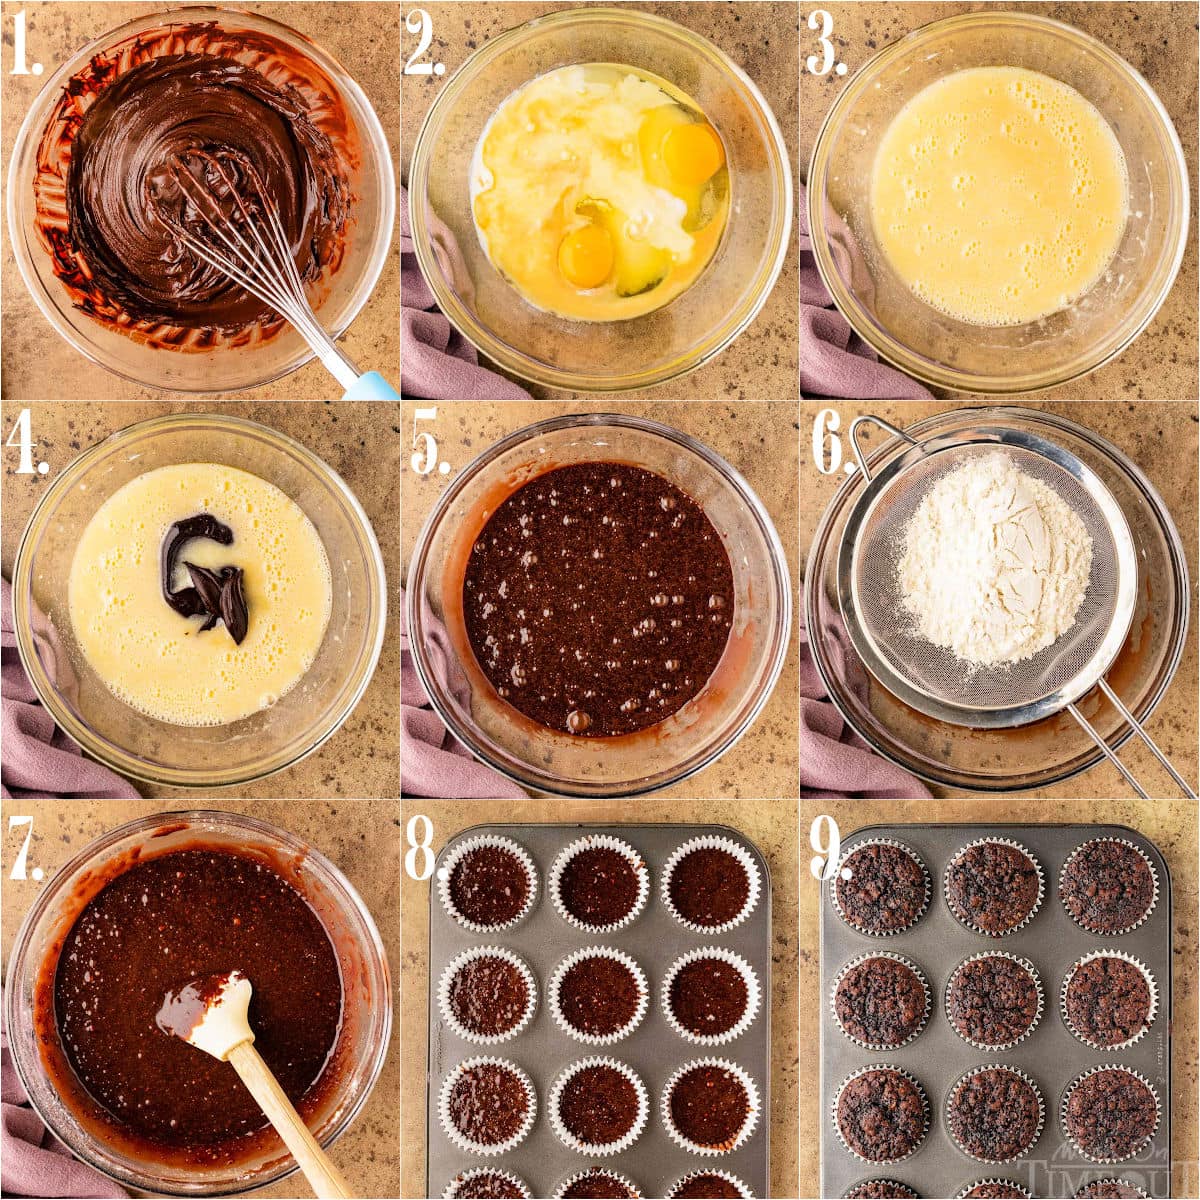 nine image collage showing how to make chocolate cupcakes step by step.